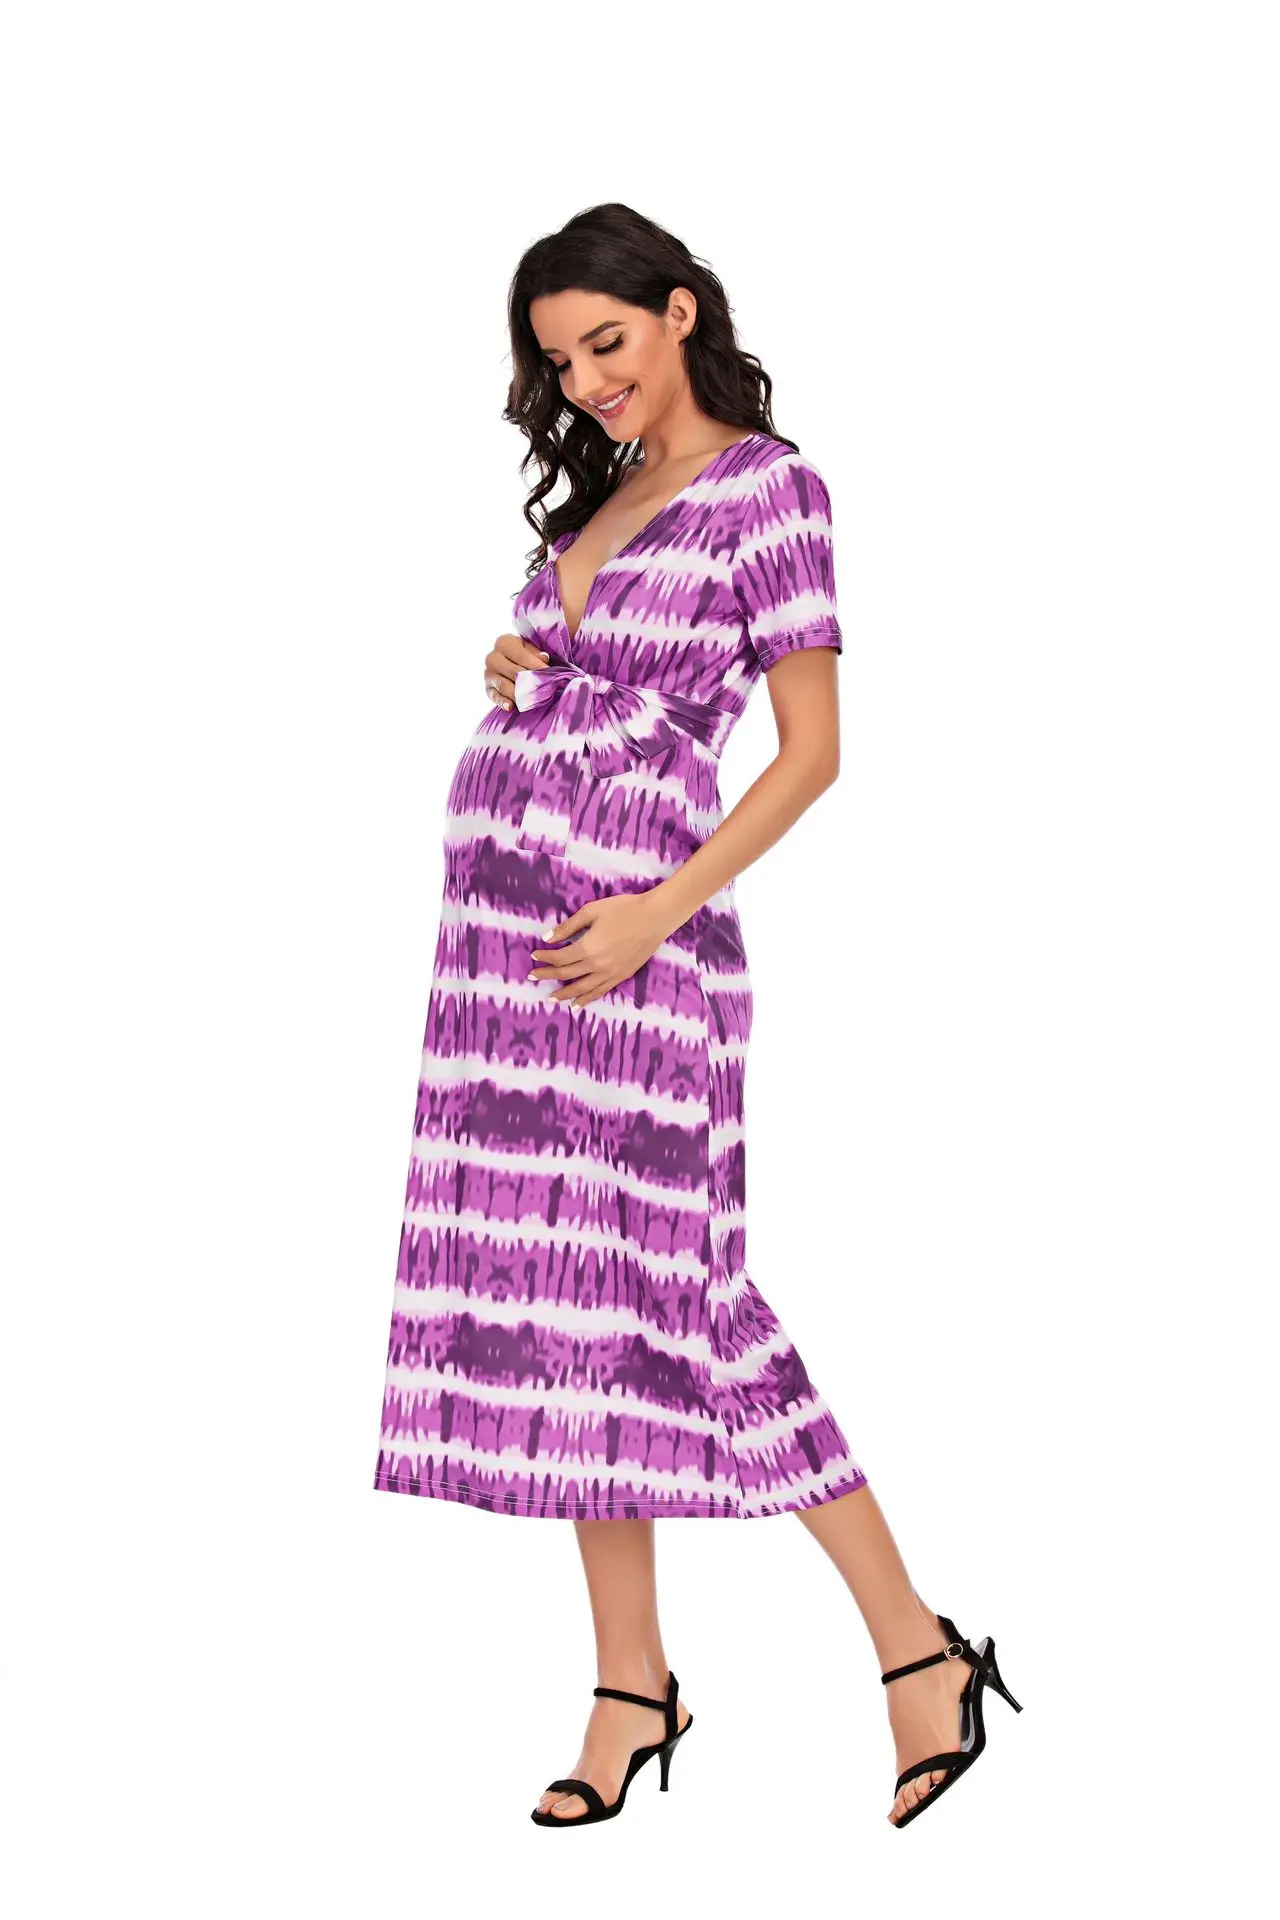 Maternity Dress Printed Women's New Sexy V Neck Short Sleeve Slit Pregnancy Dress Clothes for Pregnant Women enlarge